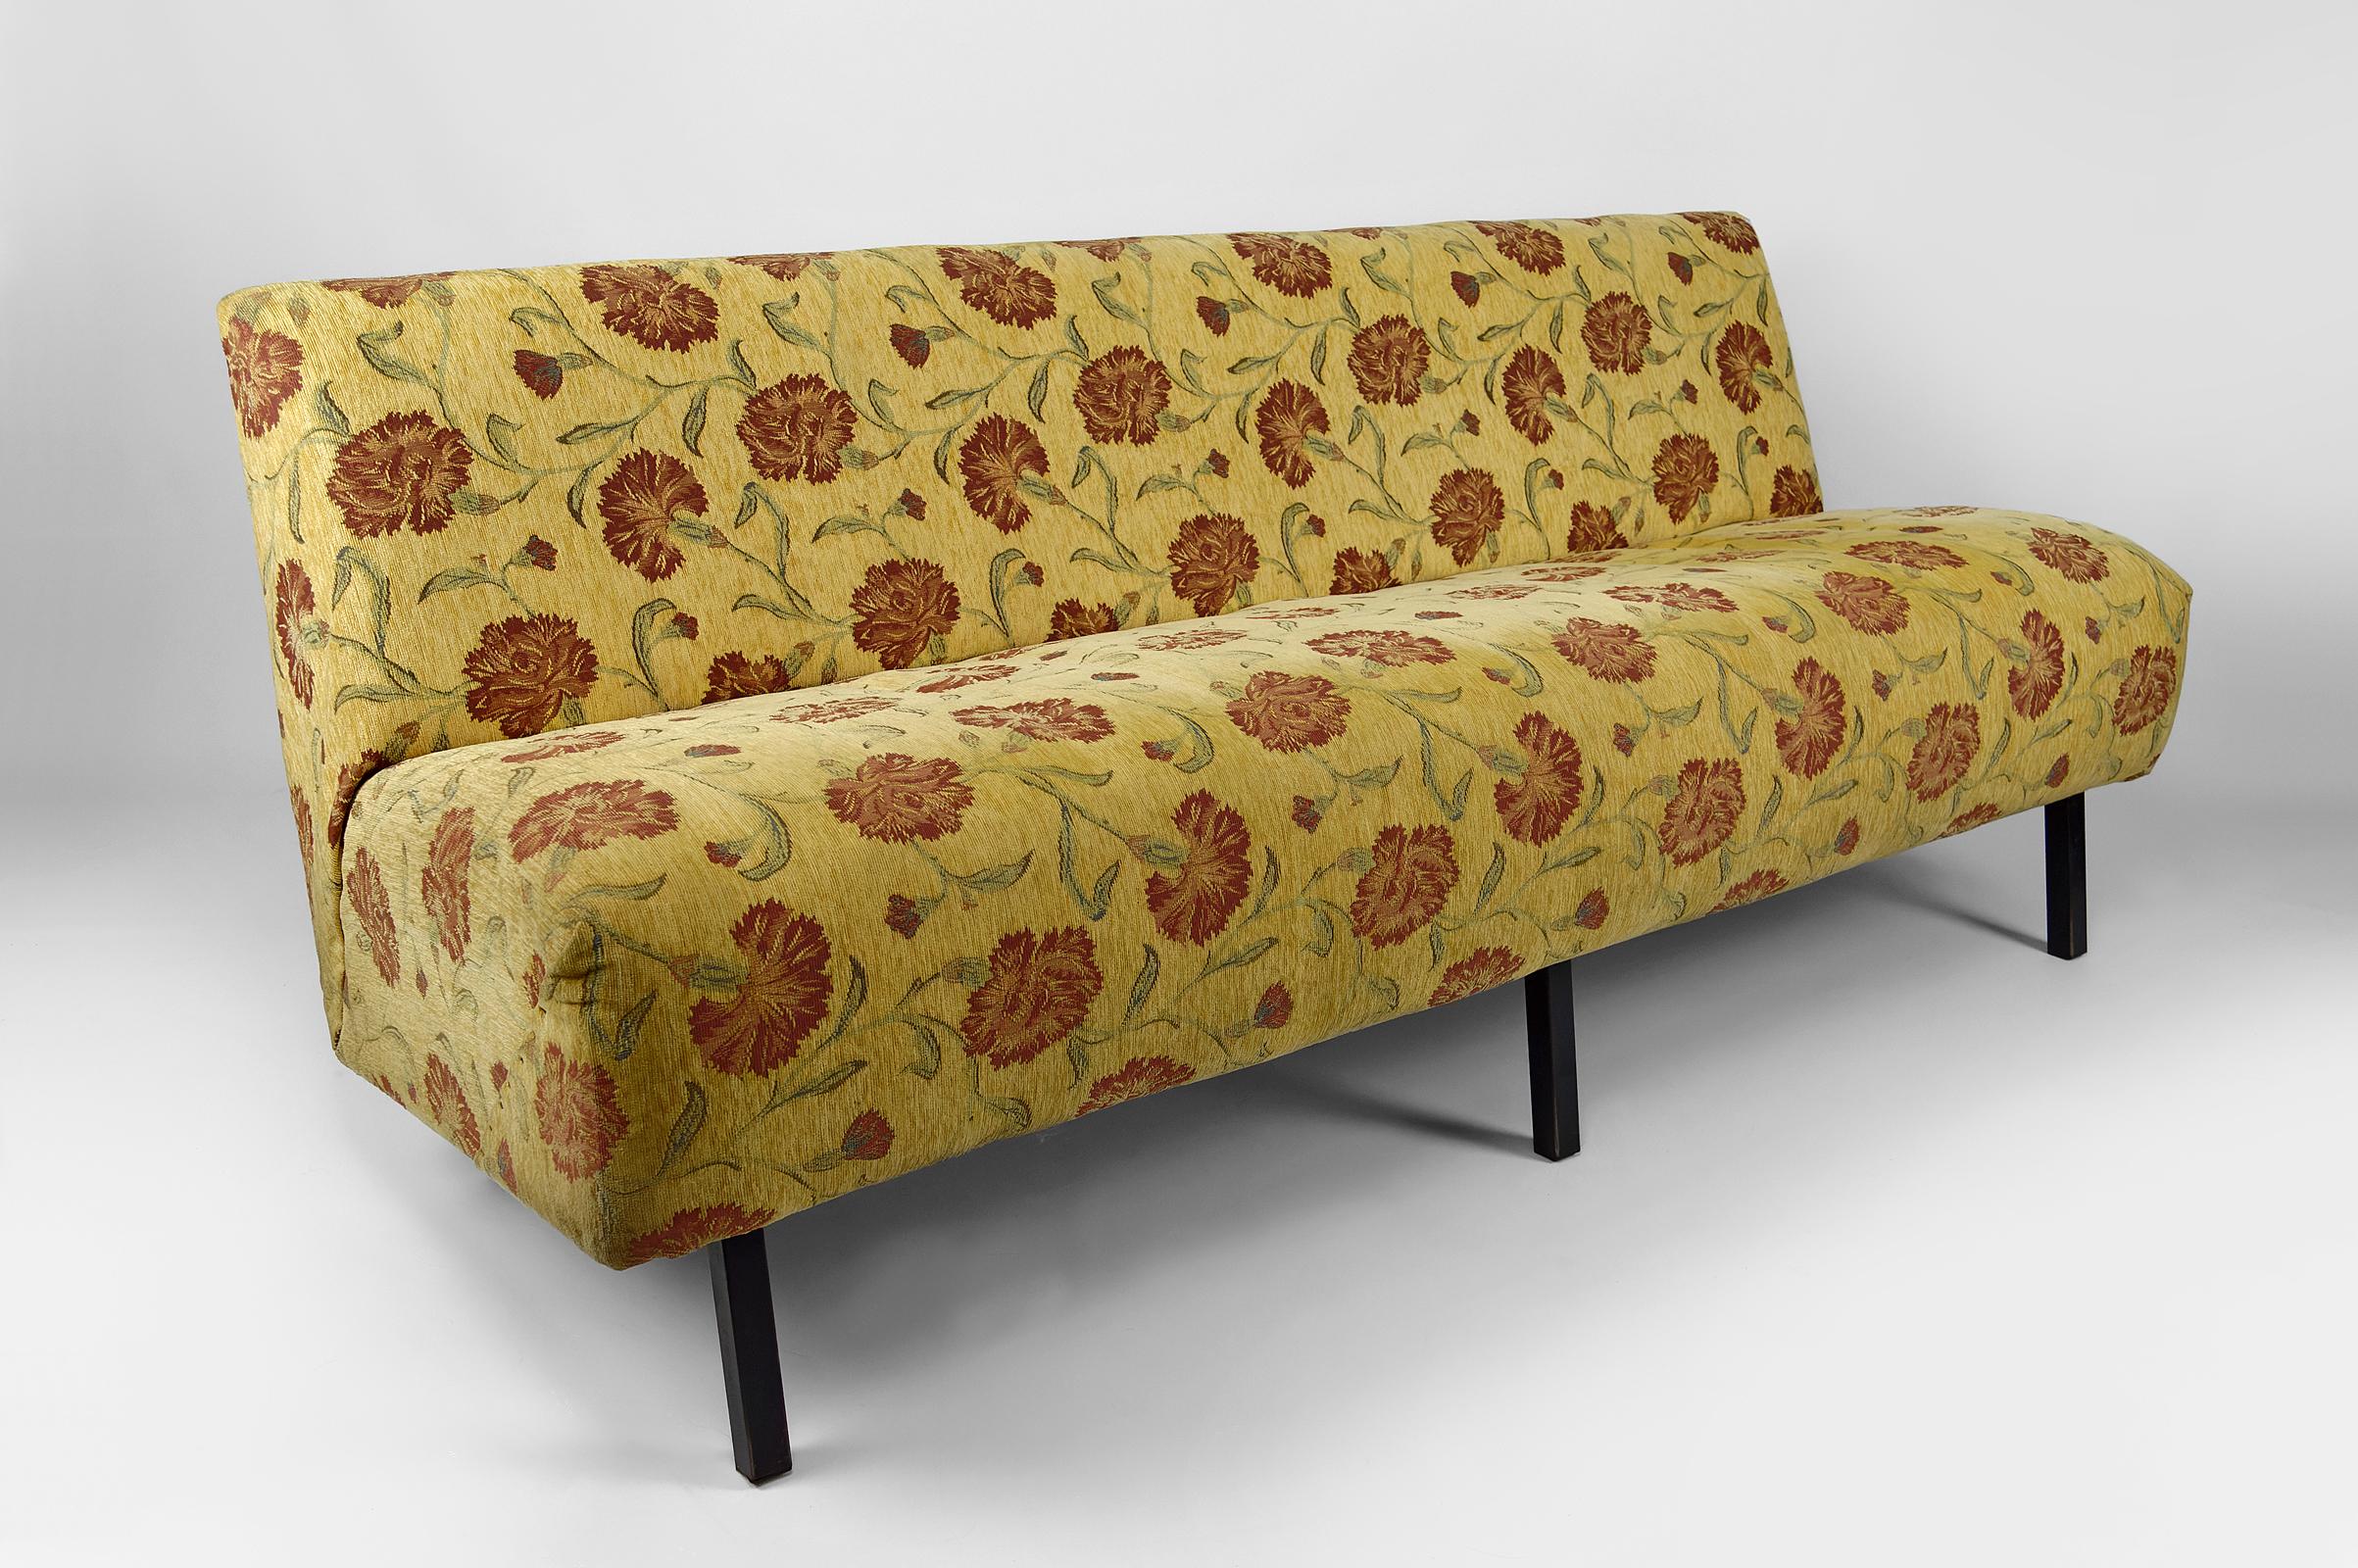 Vintage Boho sofa with yellow and red floral fabric, France, Circa 1960 For Sale 2